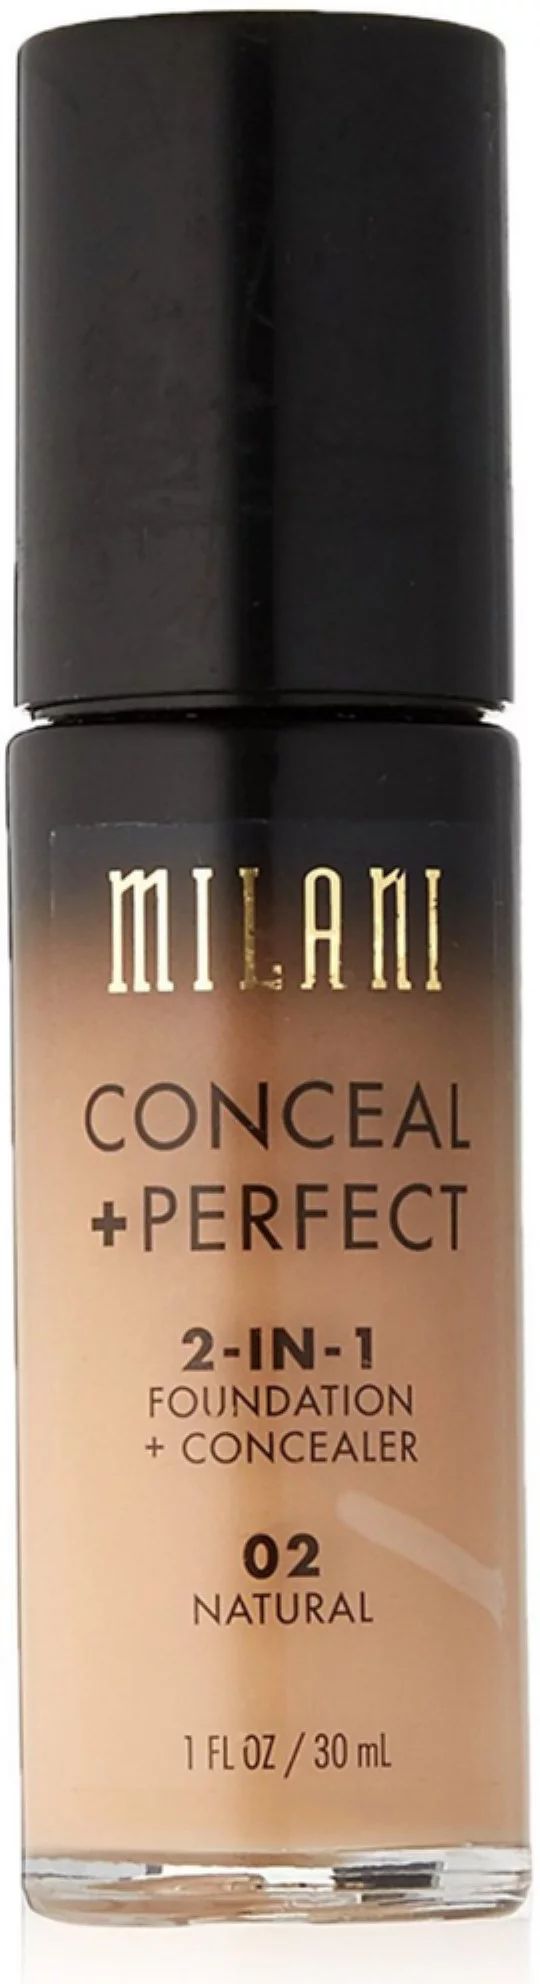 Milani Conceal + Perfect 2-in-1 Foundation + Concealer, Natural | Walmart (US)